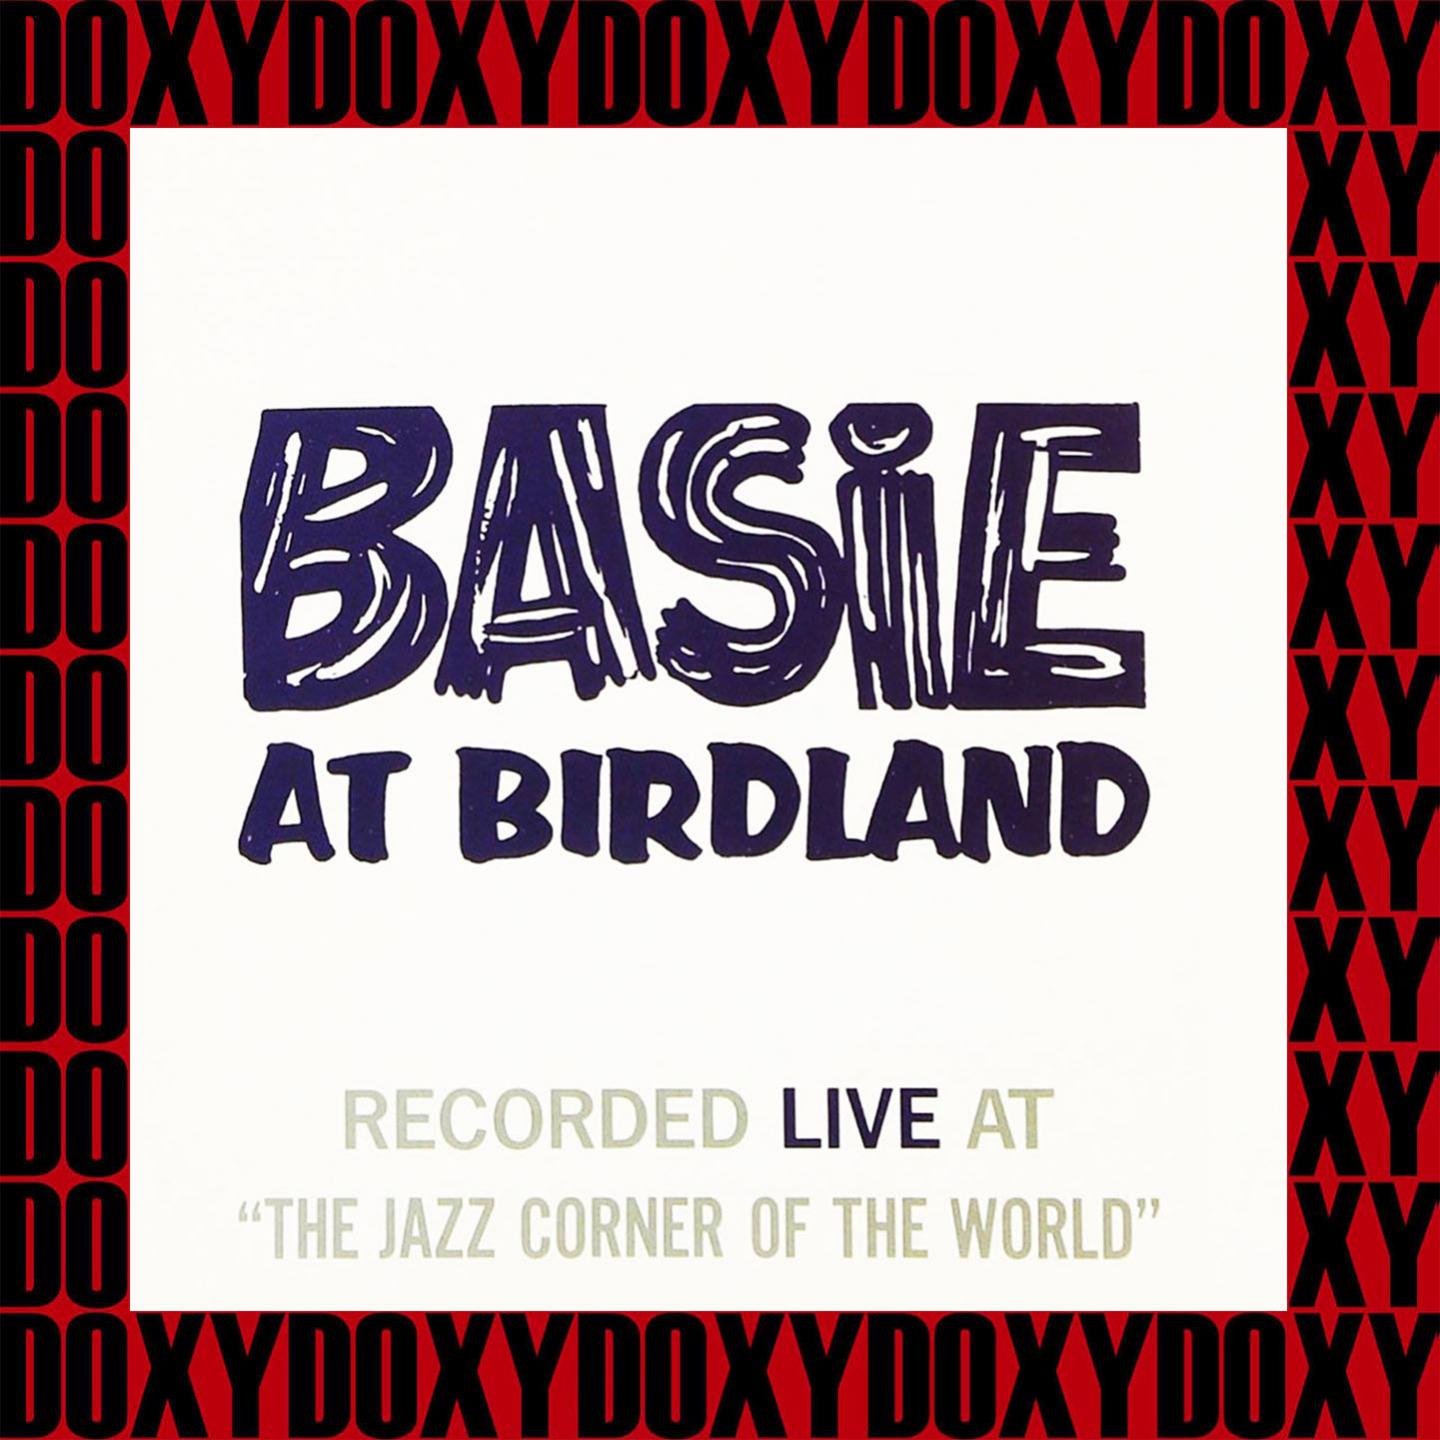 Basie At Birdland, The Complete Recordings (Remastered Version) (Doxy Collection)